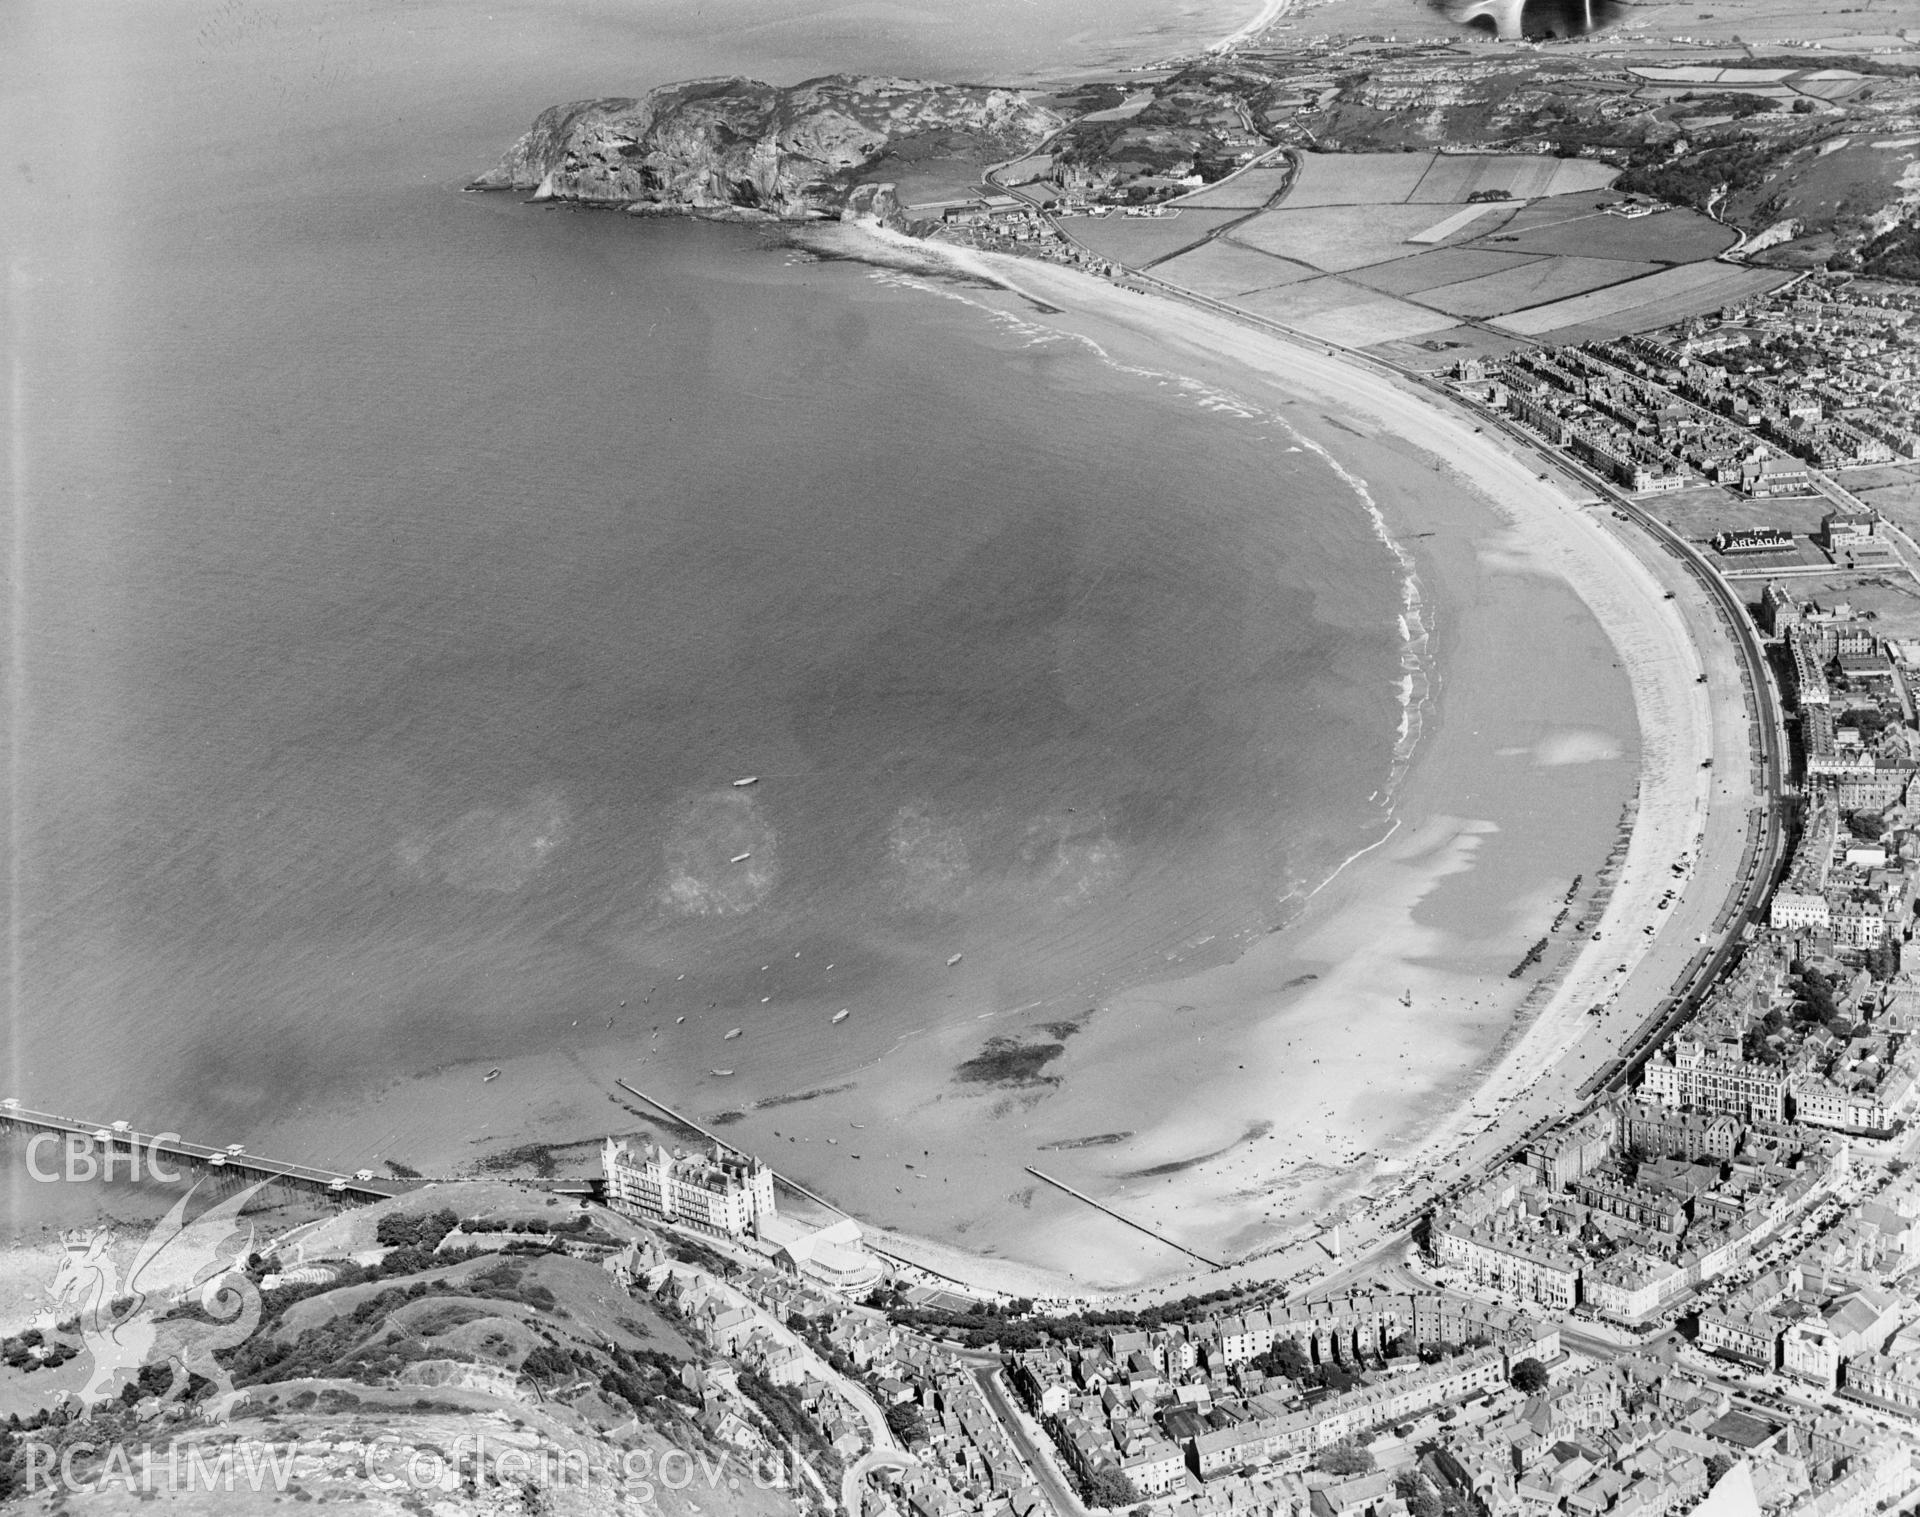 View of Llandudno, oblique aerial view. 5?x4? black and white glass plate negative.